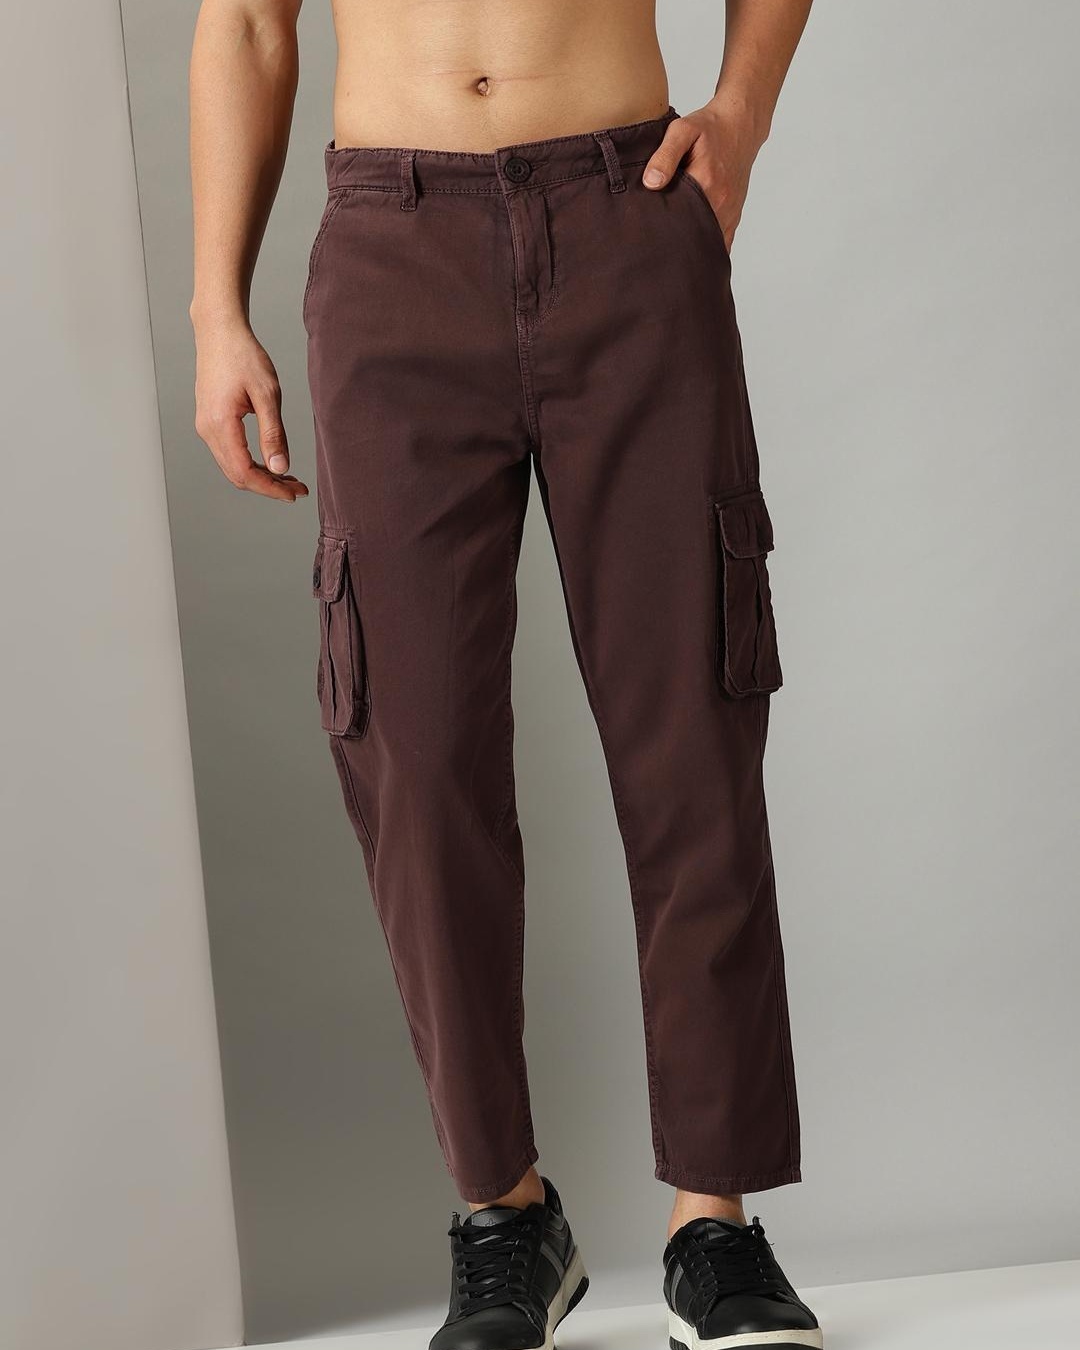 Earth tones and relaxed trousers two of my favorite things to wear right  now   Earth tone clothes Mens casual outfits Mens outfits